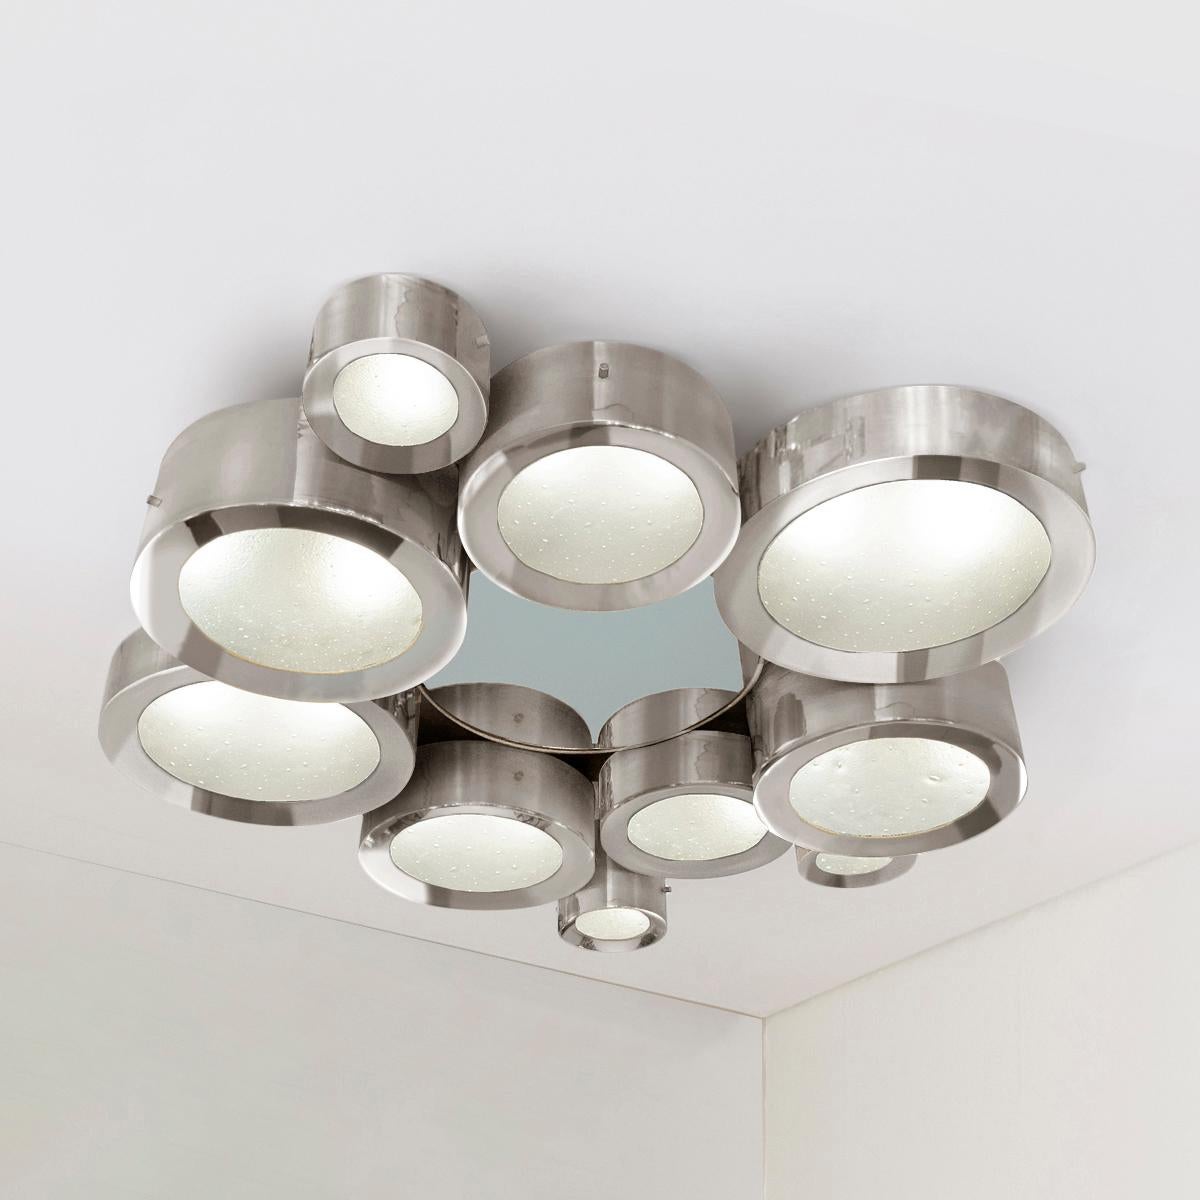 The Helios ceiling light features an imposing composition of illuminated Murano glass shades gravitating around a central tinted mirror. The first images show the fixture in polished nickel with a gray center mirror-subsequent pictures show it in a